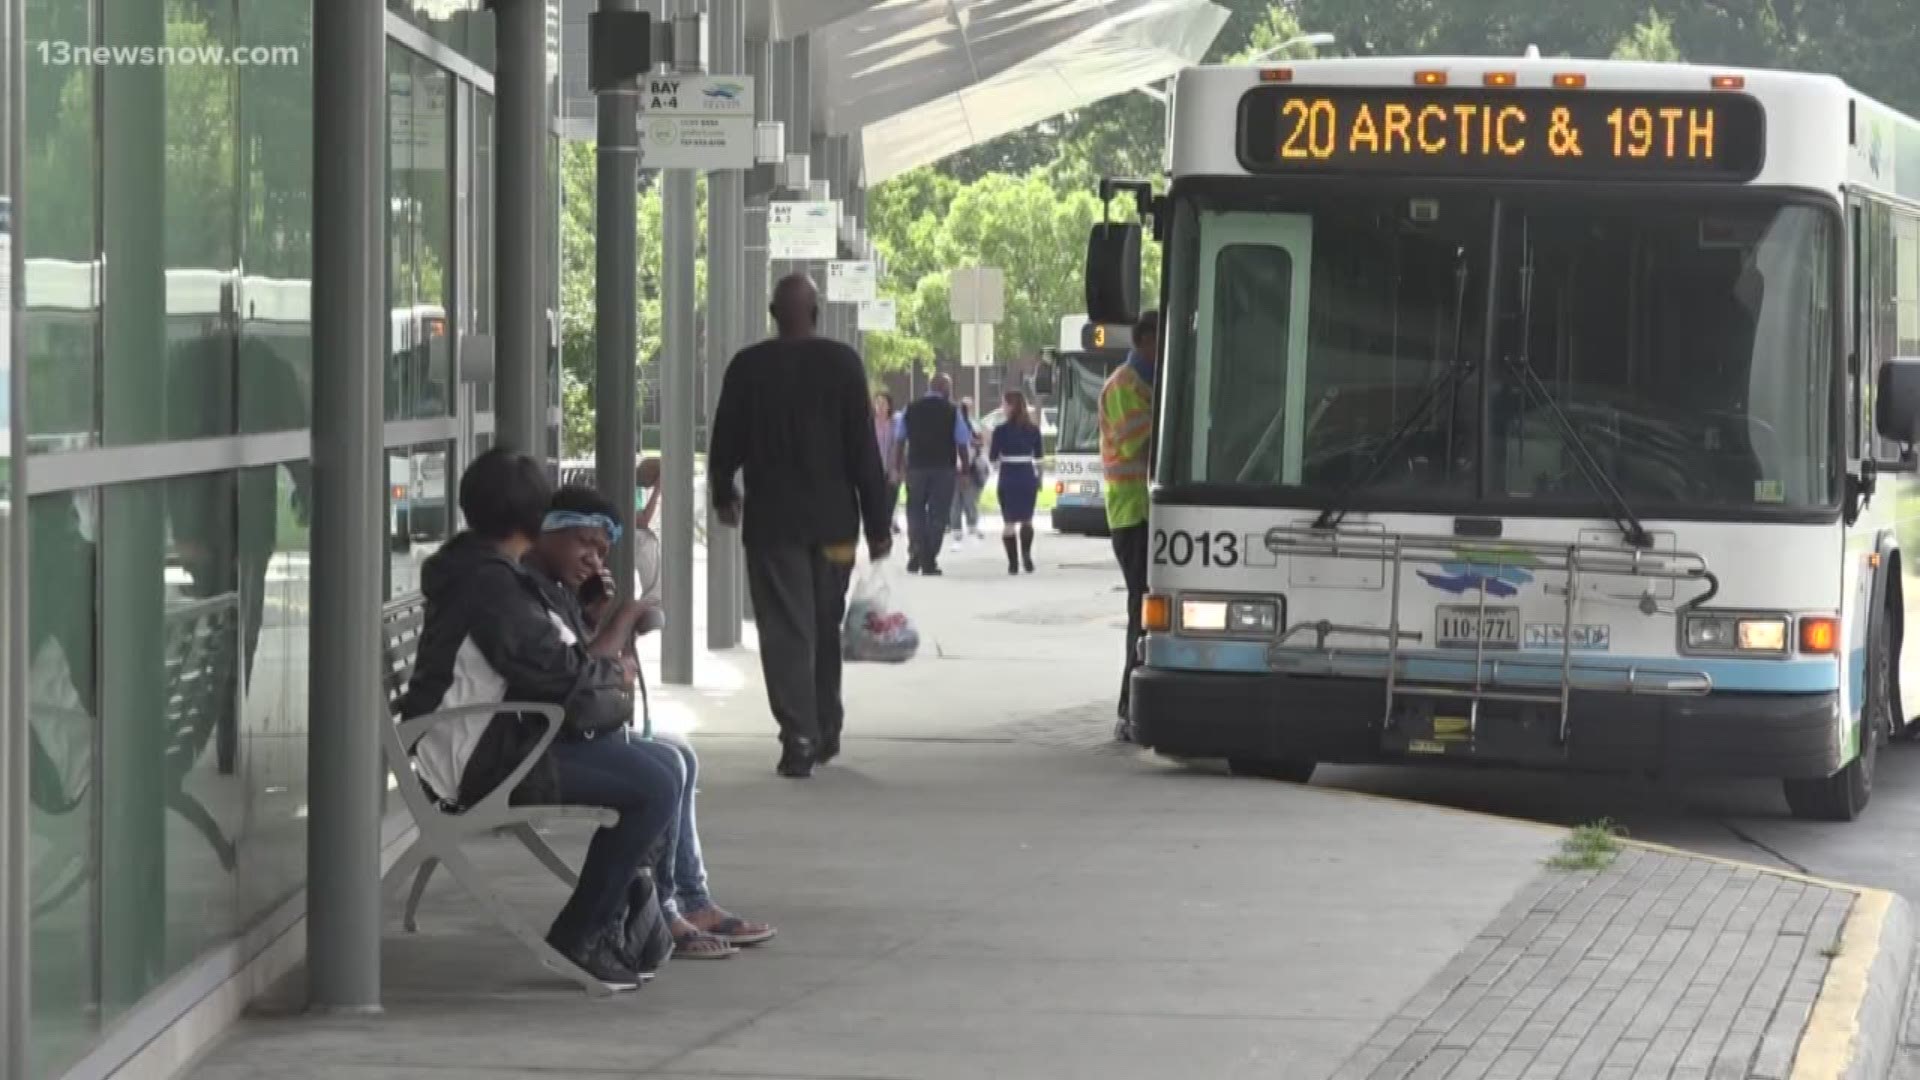 According to commuters, the buses aren't reliable and sometimes don't show at all. Virginia Organizing is voicing its concerns to Newport News City Council.